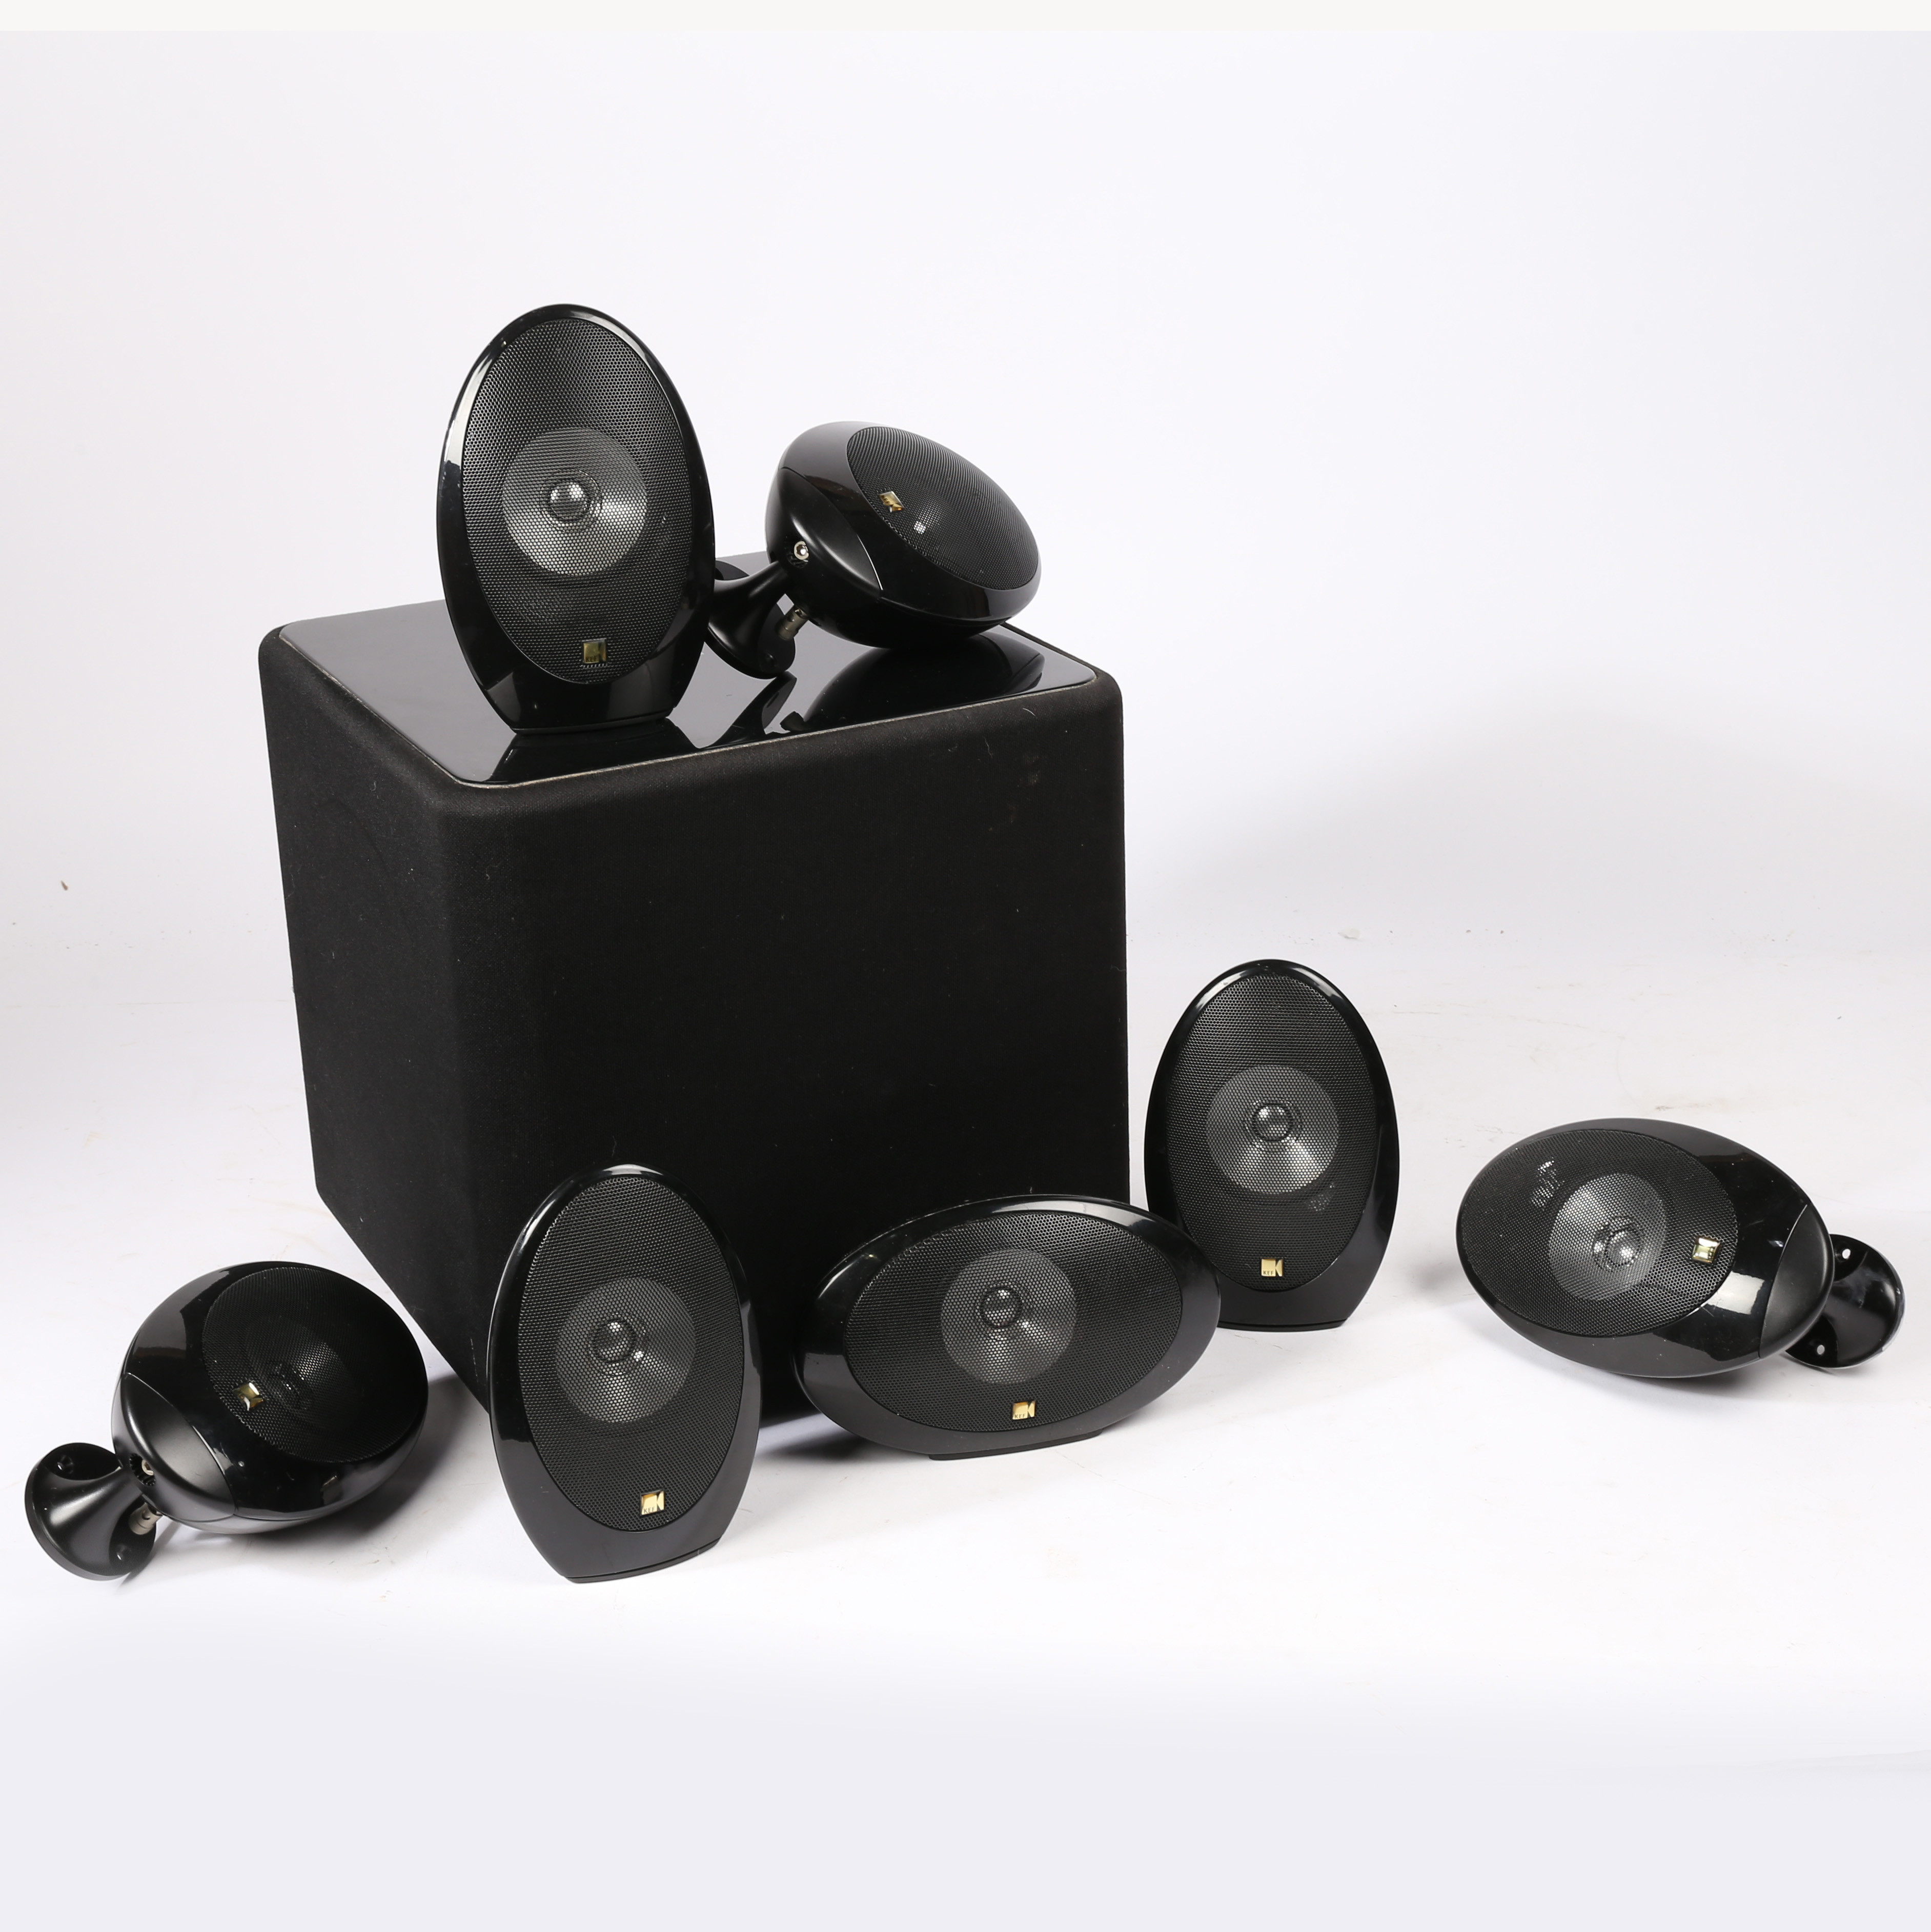 KEF KUBE-1 SUB AND 1000 SERIES HOME THEATRE SPEAKER SYSTEM.